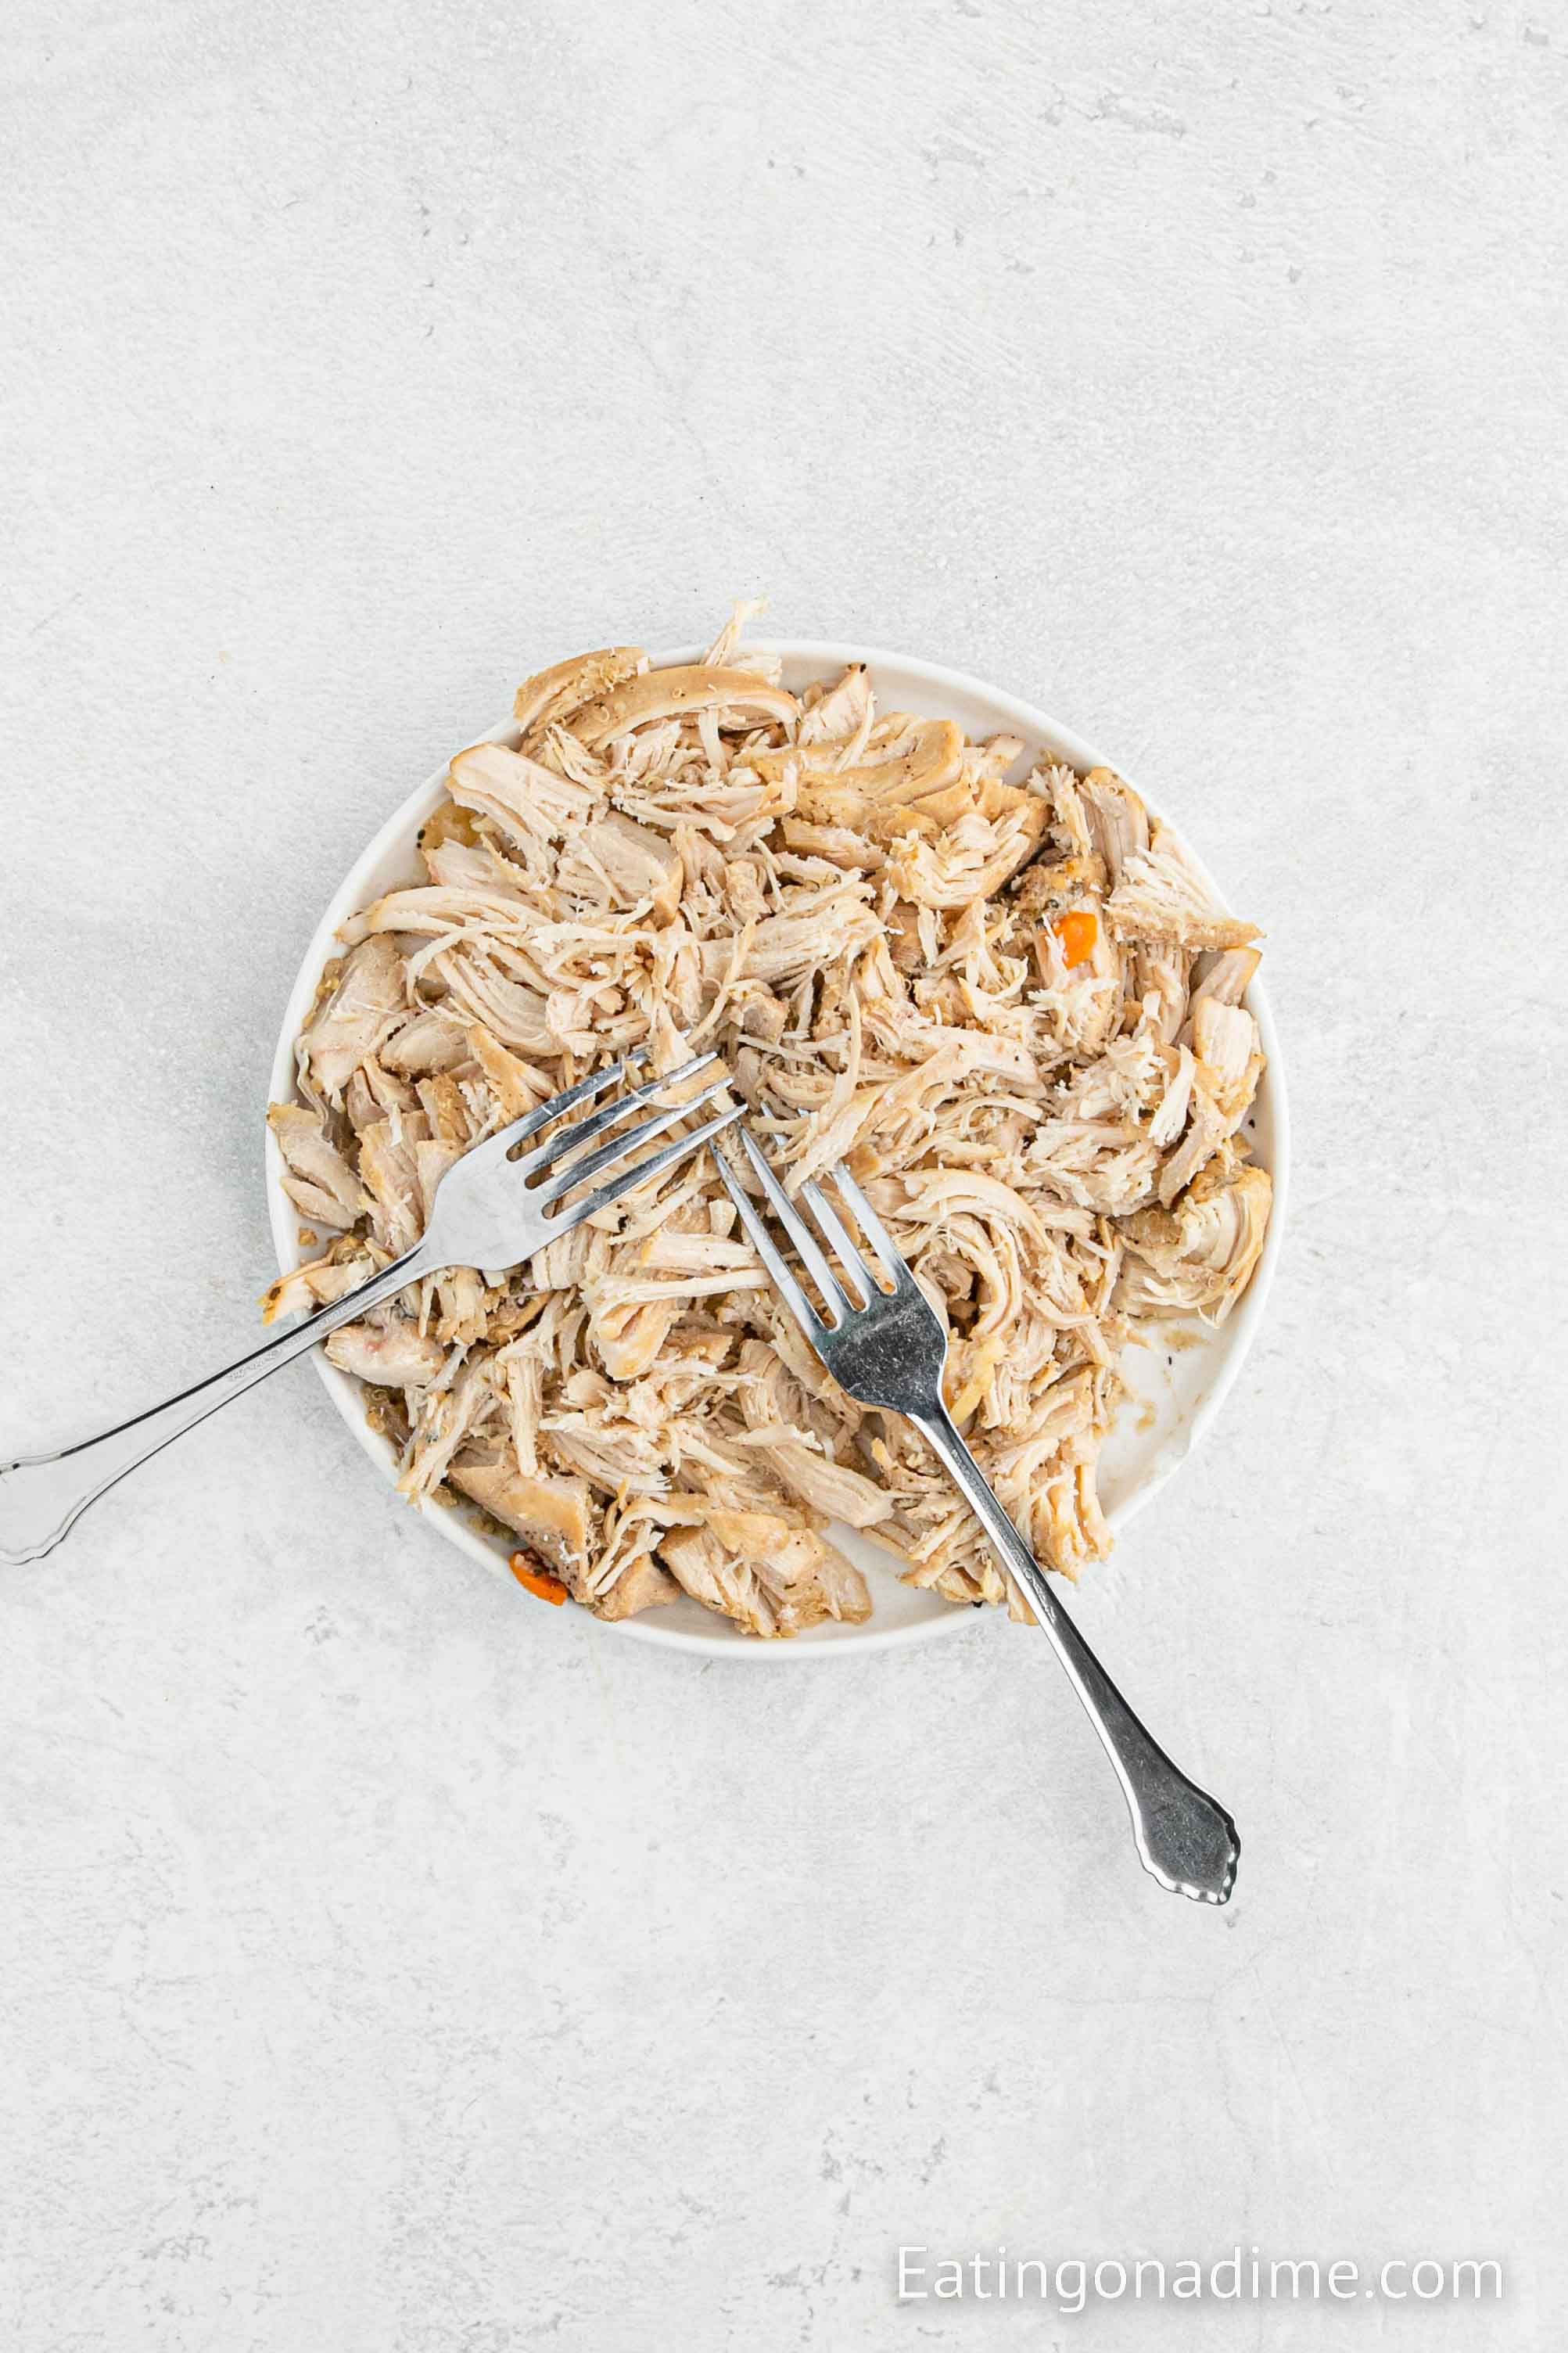 Shredding cooked chicken with two forks on a plate